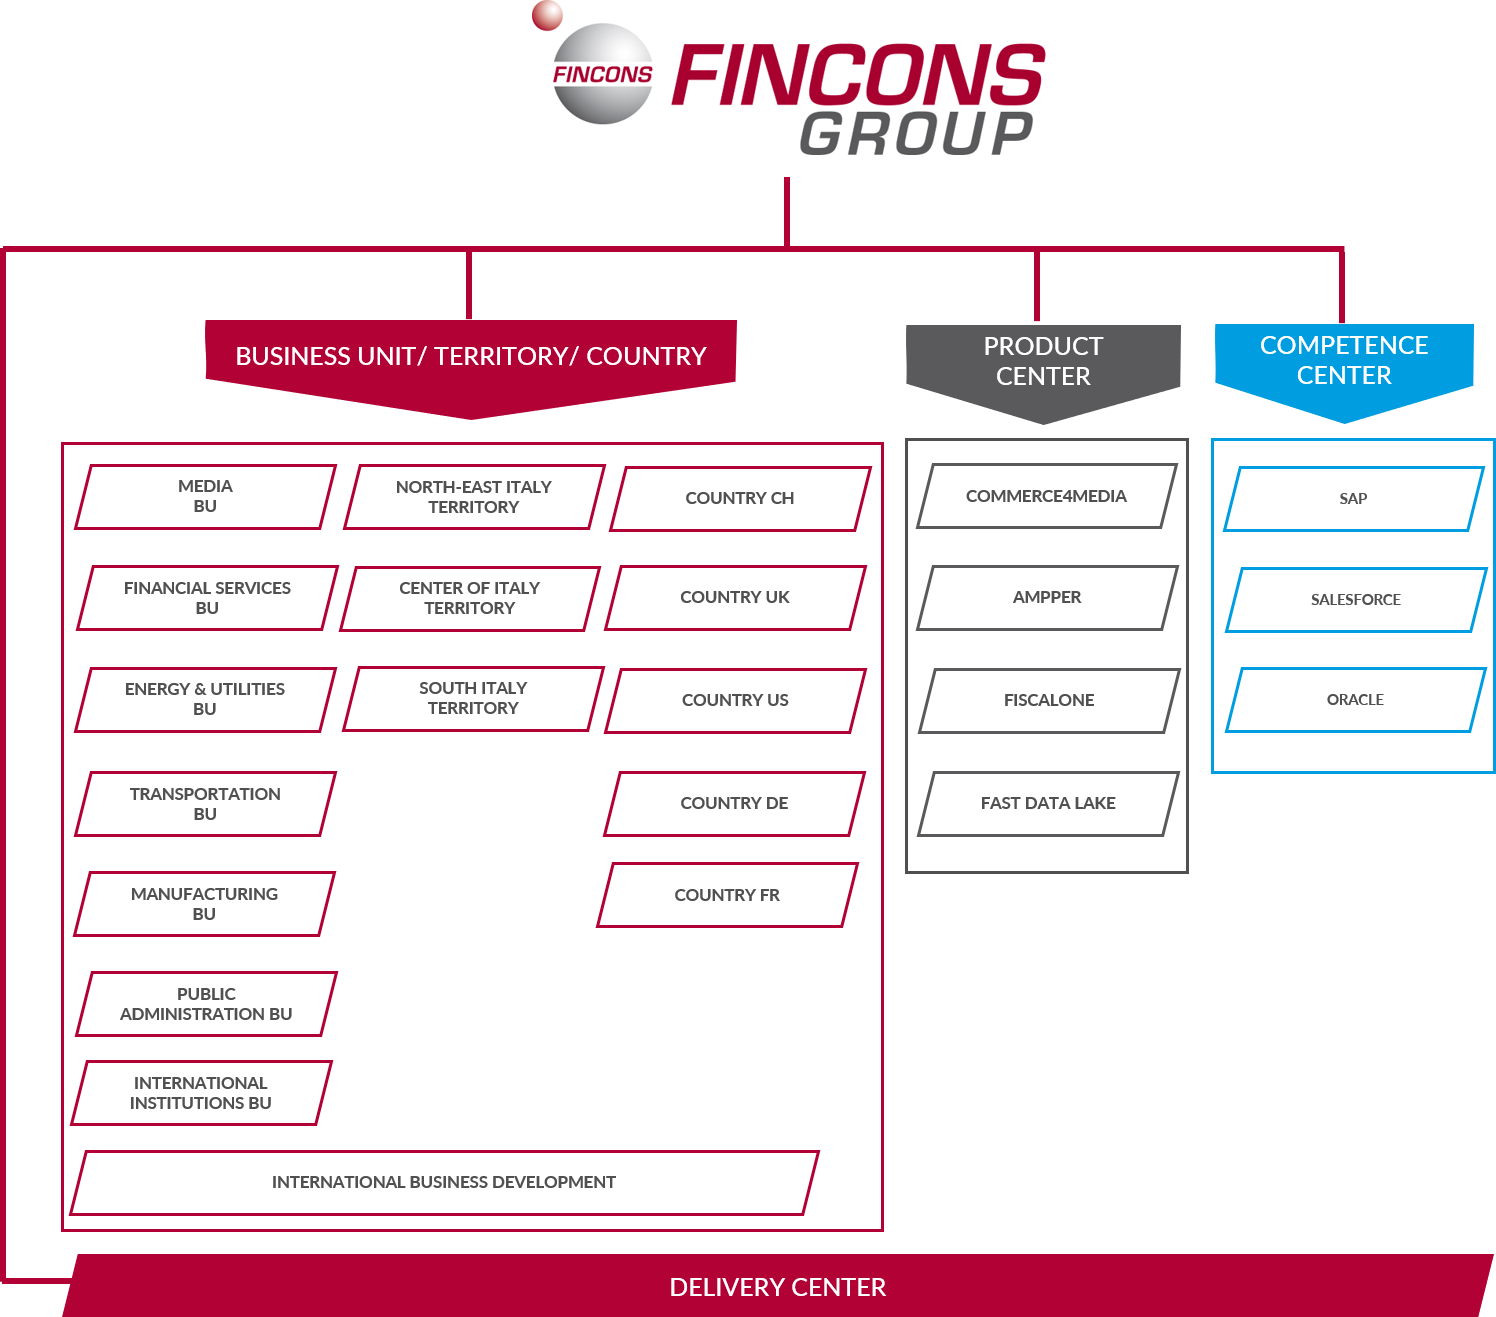 Fincons’ Corporate Governance